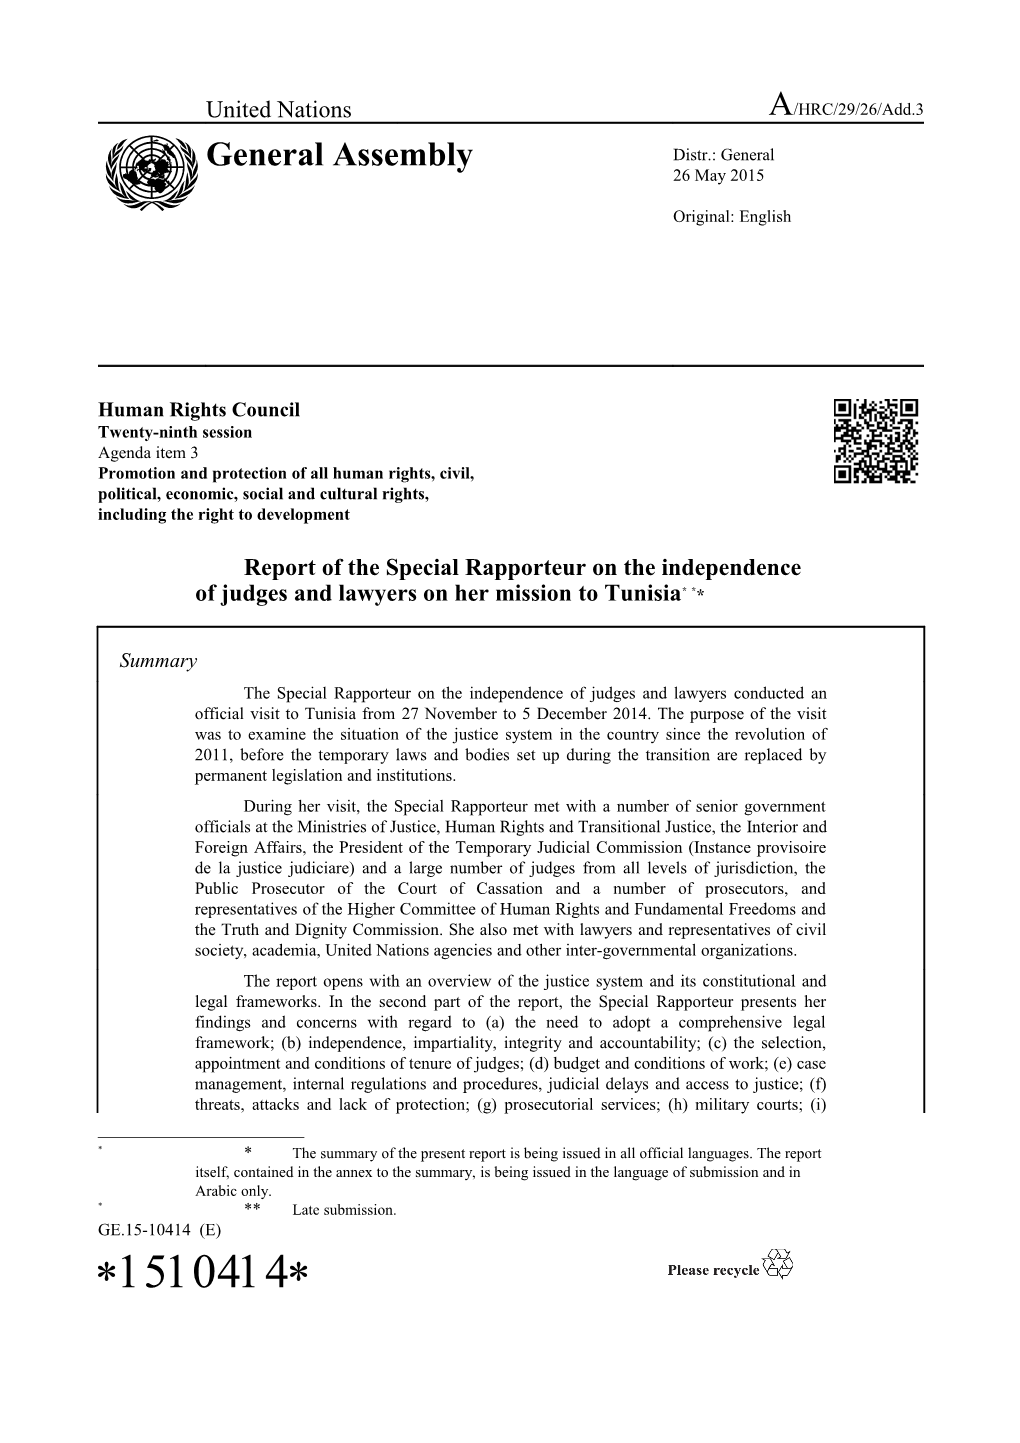 Report of the Special Rapporteur on the Independence of Judges and Lawyers - Mission To